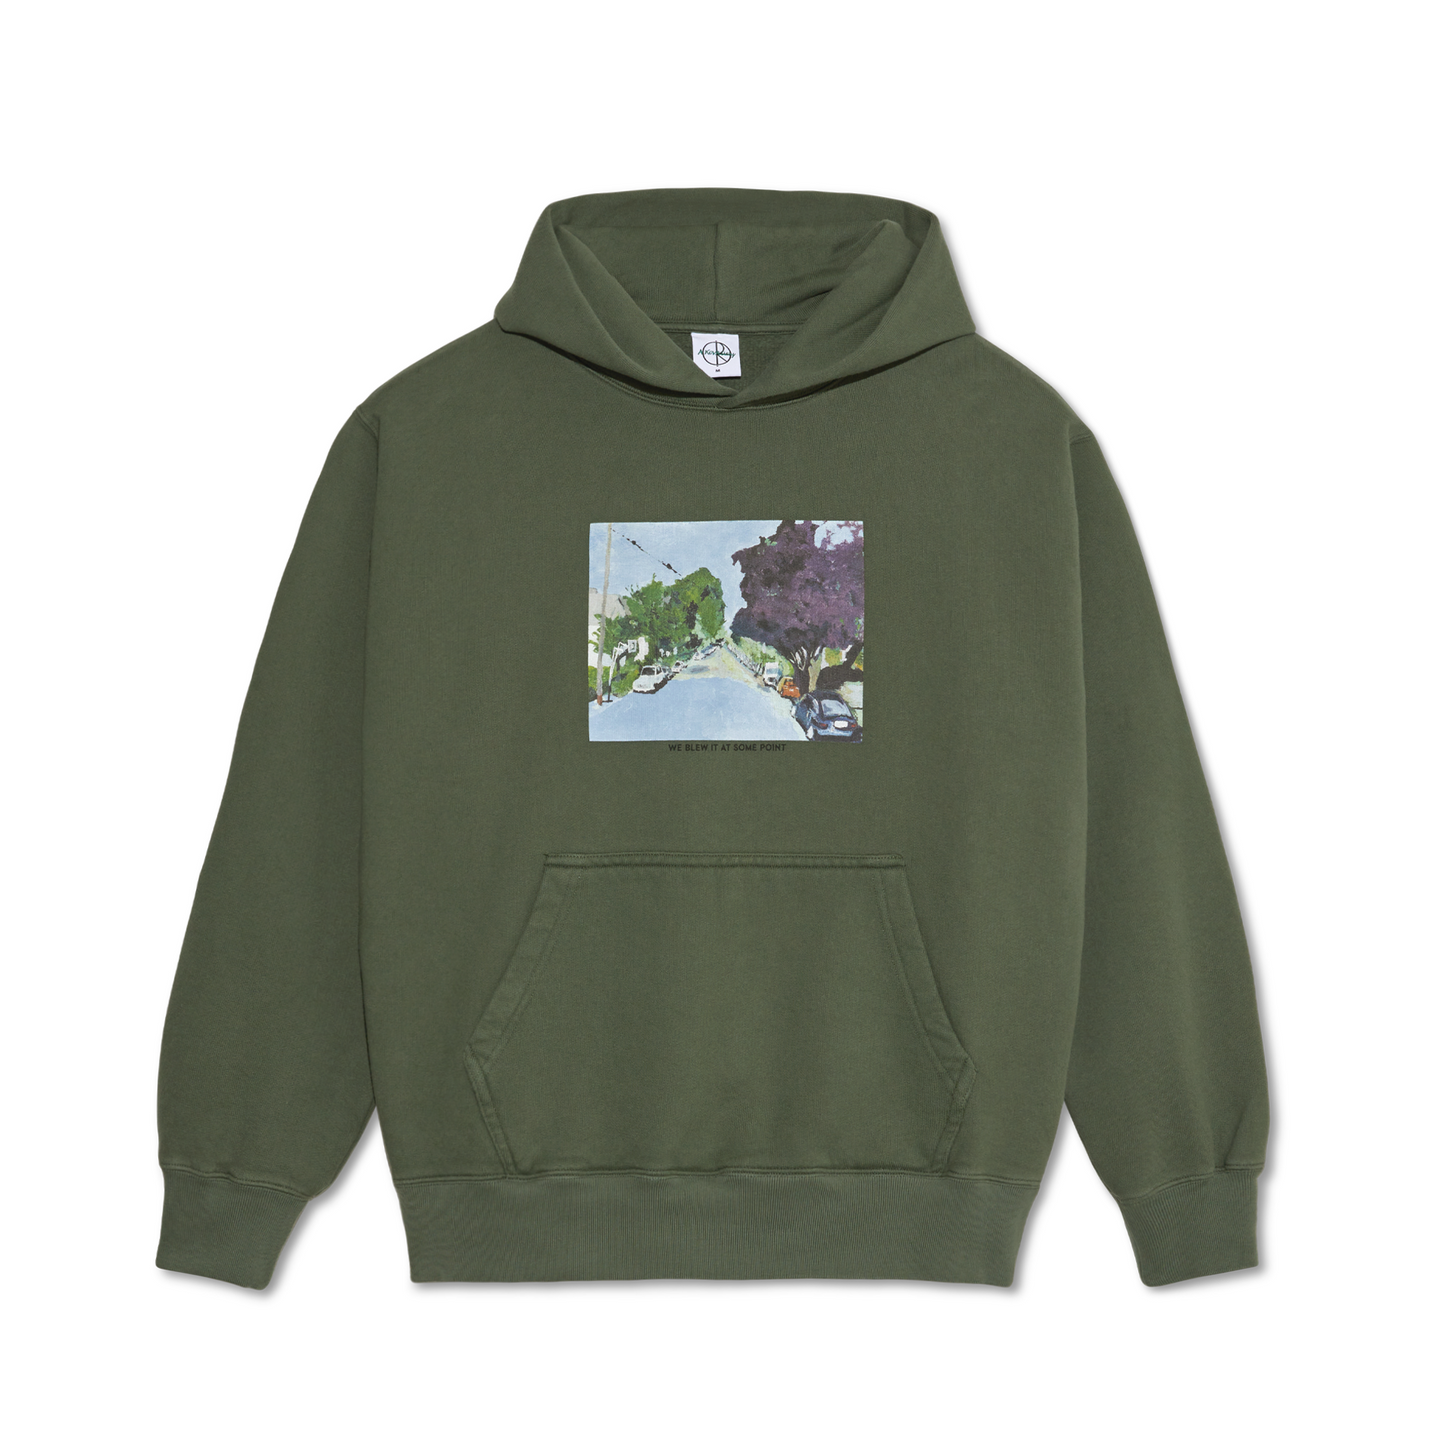 Polar Ed [We Blew It At Some Point] Hoodie Grey Green